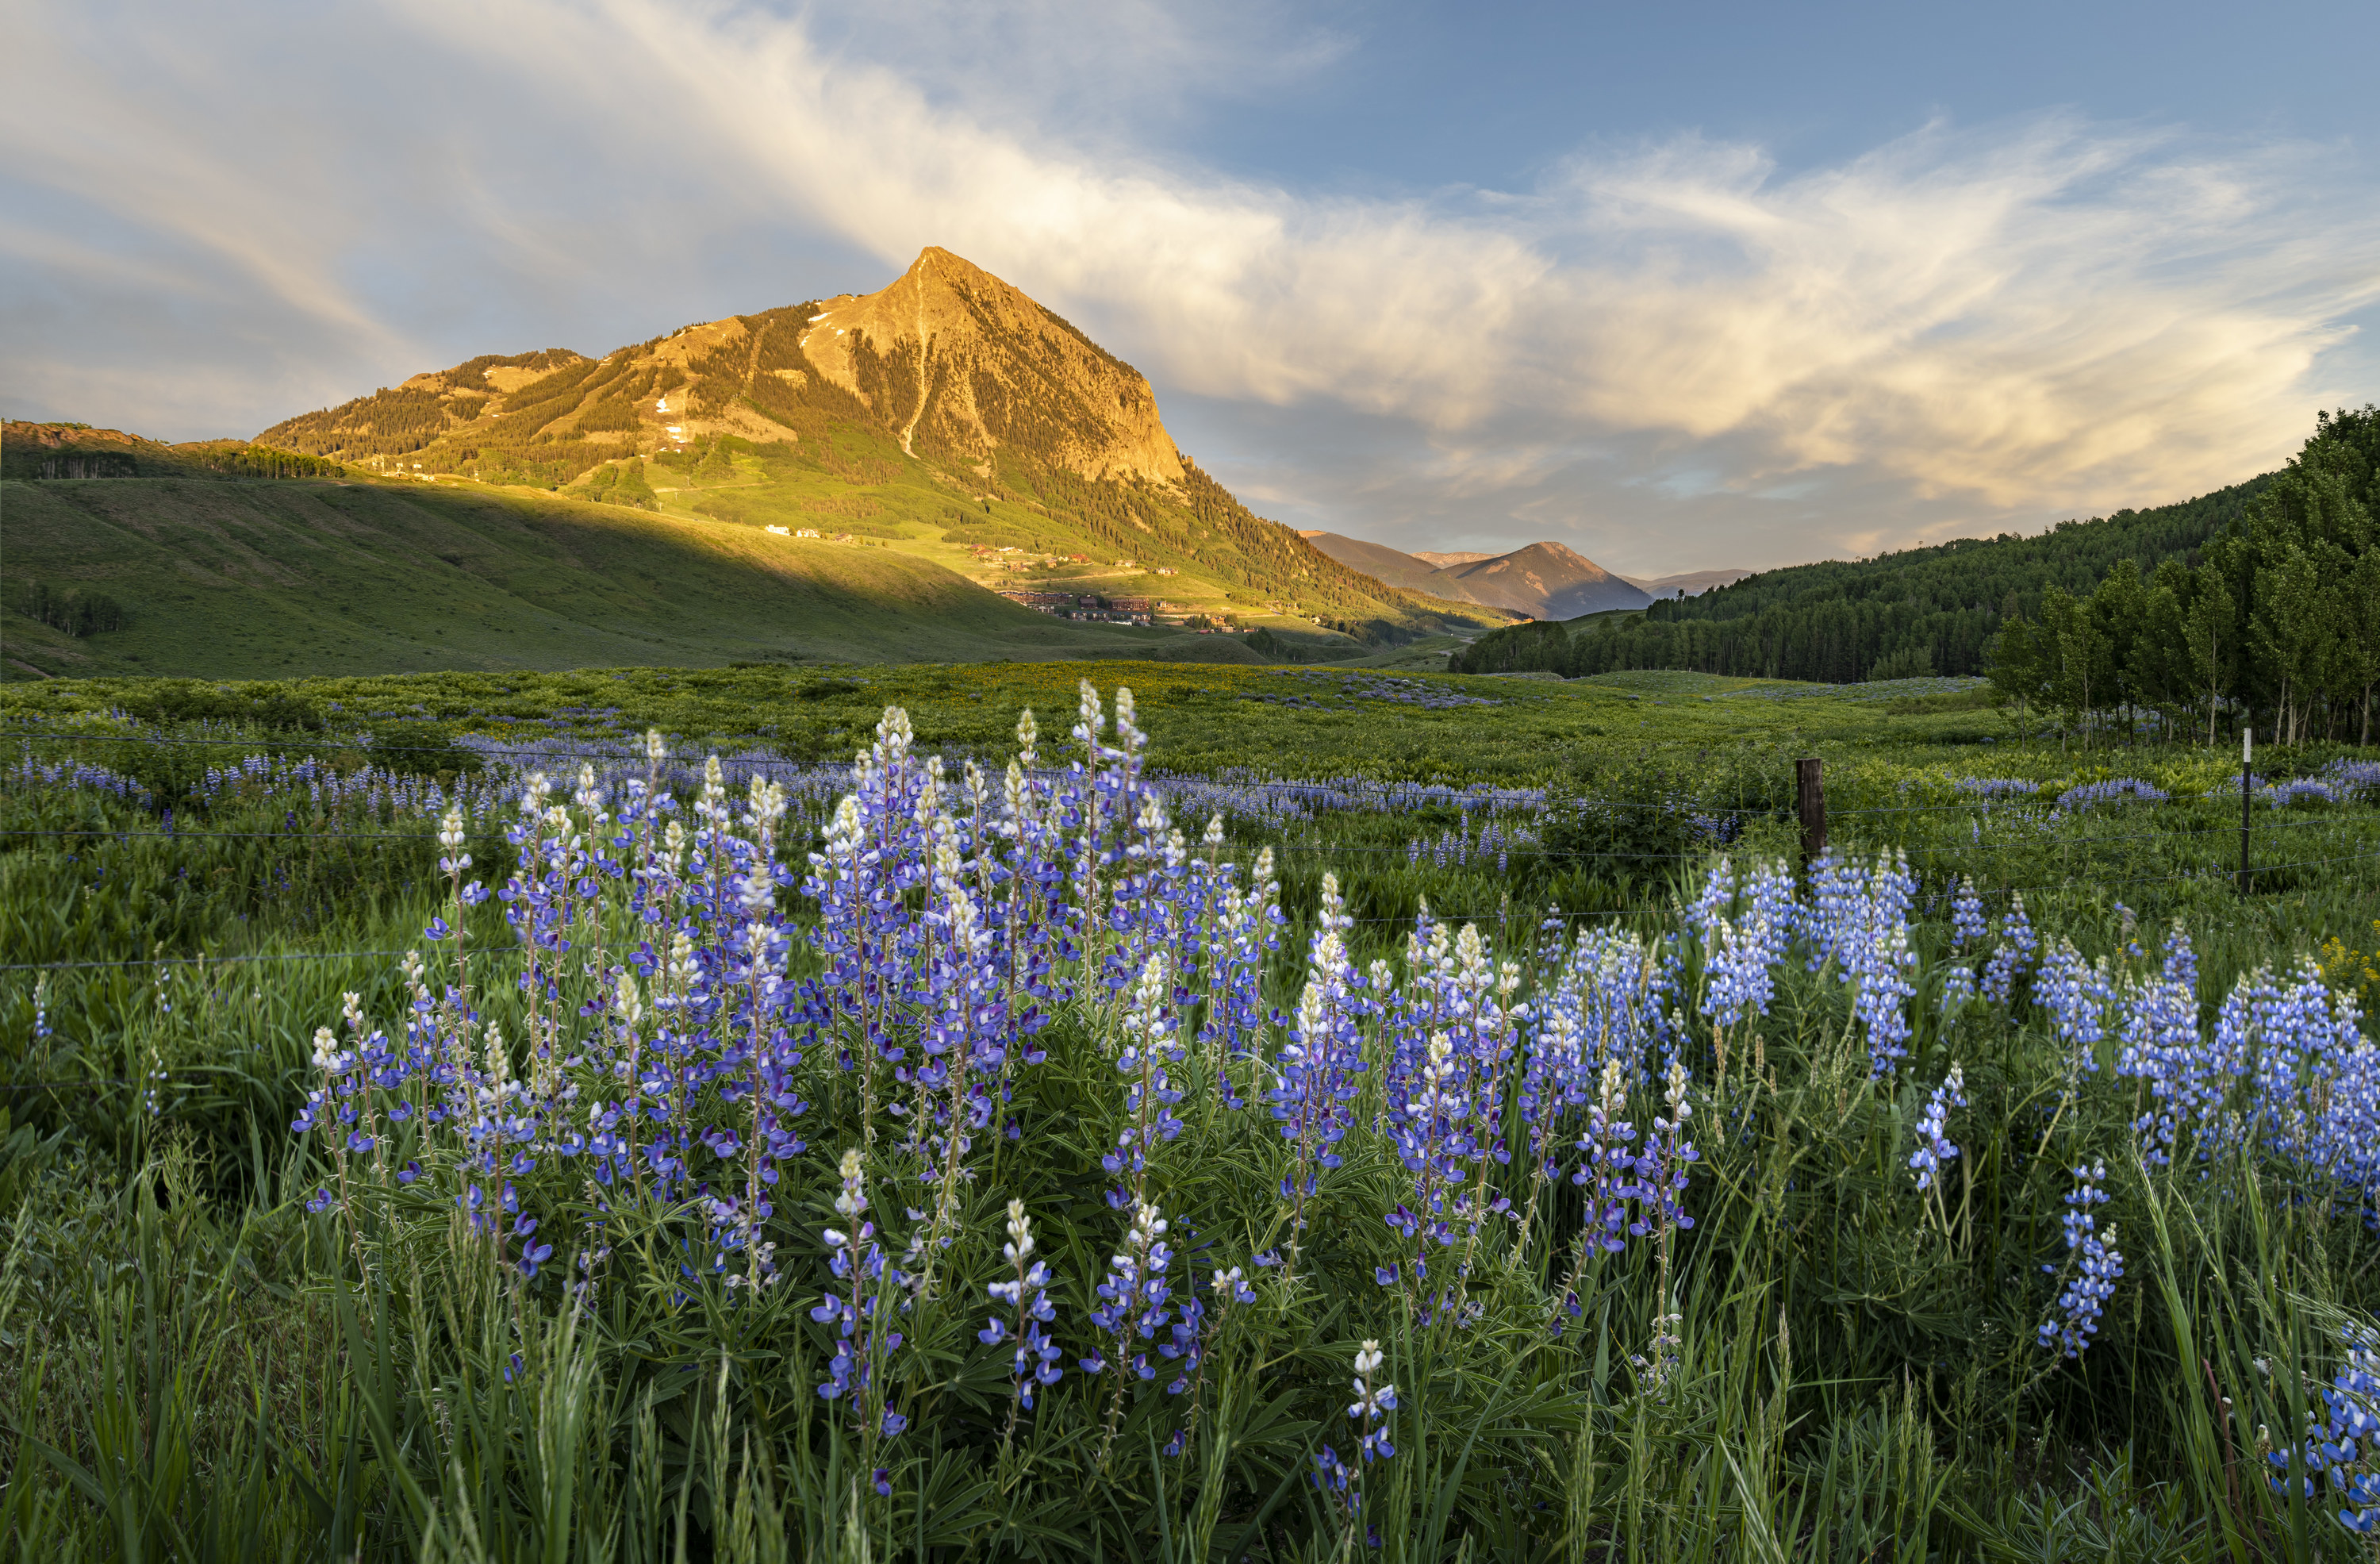 Wildflowers in the foreground with mountains in the distance